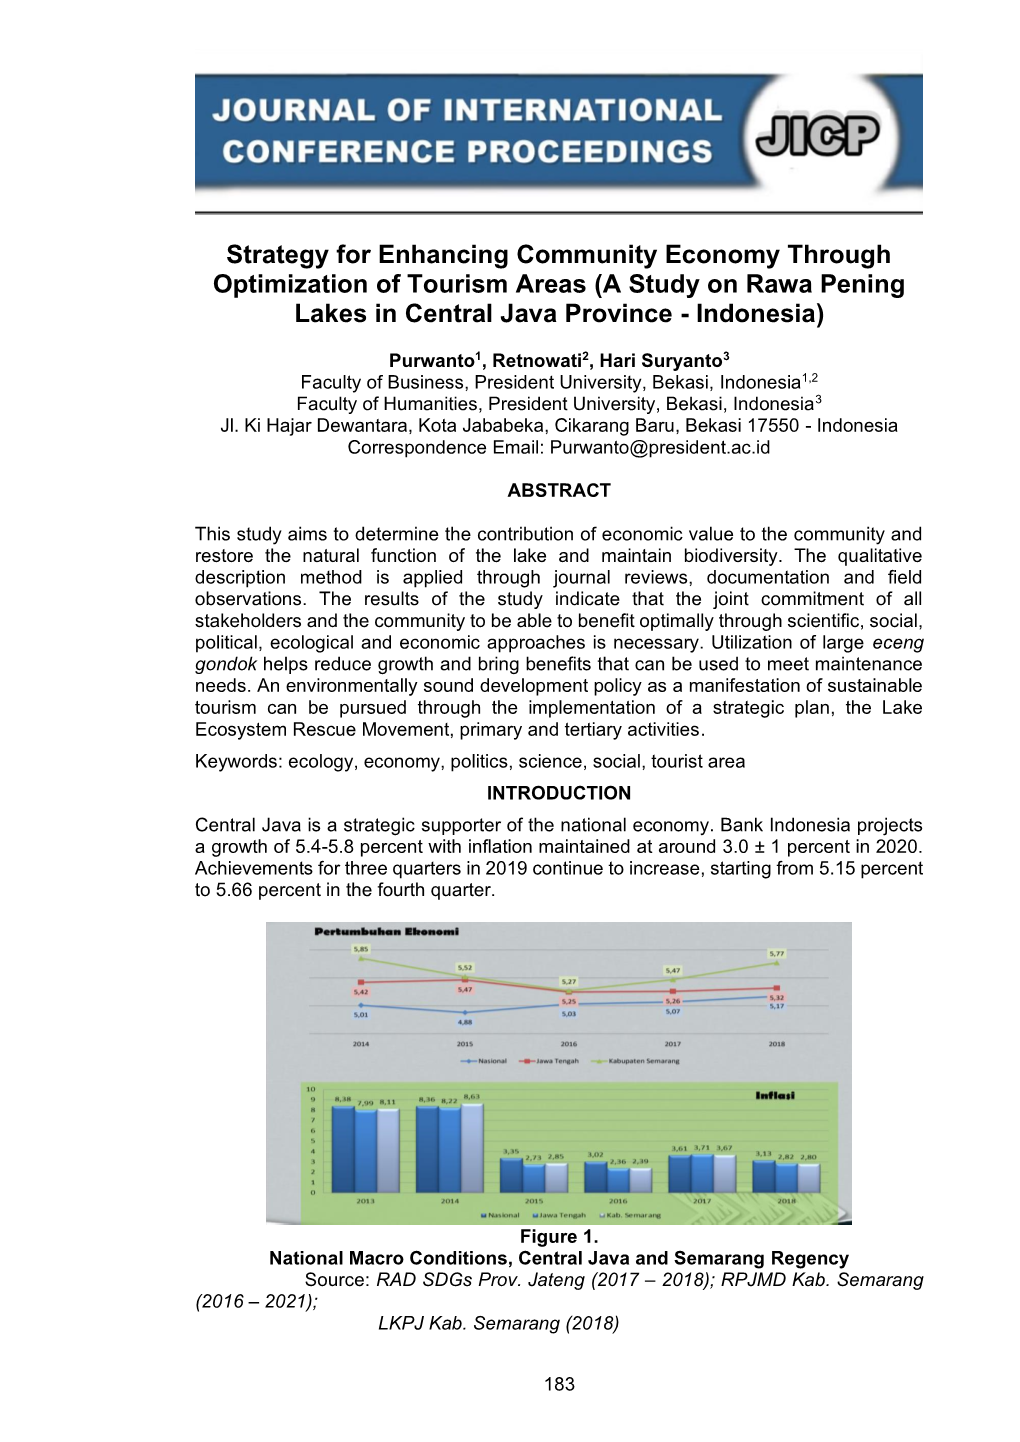 Strategy for Enhancing Community Economy Through Optimization of Tourism Areas (A Study on Rawa Pening Lakes in Central Java Province - Indonesia)